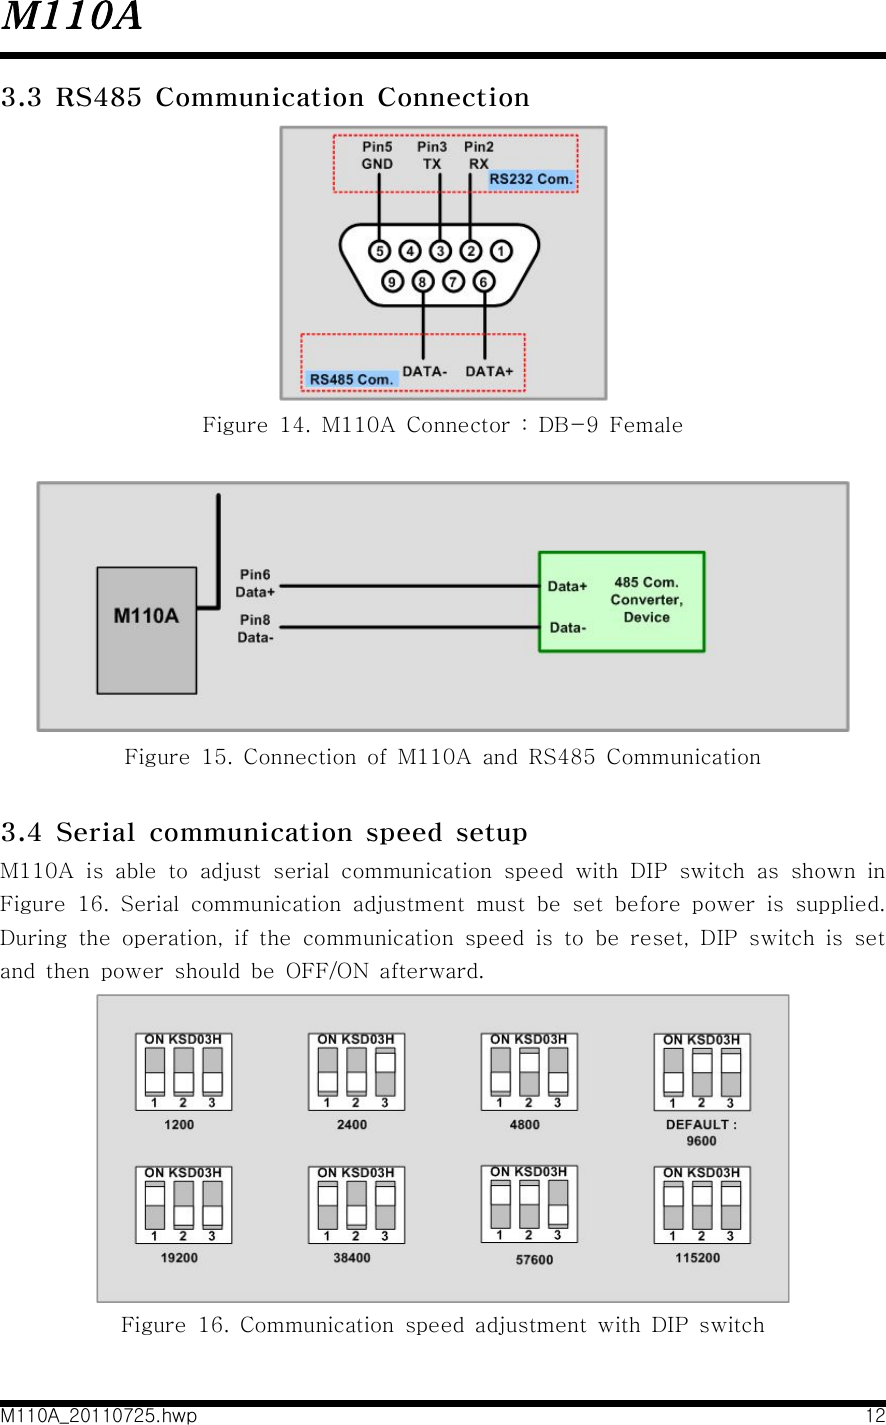 M110AM110A_20110725.hwp 123.3  RS485  Communication  ConnectionFigure  14.  M110A  Connector  :  DB-9  FemaleFigure  15.  Connection  of  M110A  and  RS485  Communication3.4  Serial  communication  speed  setupM110A  is  able  to  adjust  serial  communication  speed  with  DIP  switch  as  shown  in Figure  16.  Serial  communication  adjustment  must  be  set  before  power  is  supplied. During  the  operation,  if  the  communication  speed  is  to  be  reset,  DIP  switch  is  set and  then  power  should  be  OFF/ON  afterward.Figure  16.  Communication  speed  adjustment  with  DIP  switch